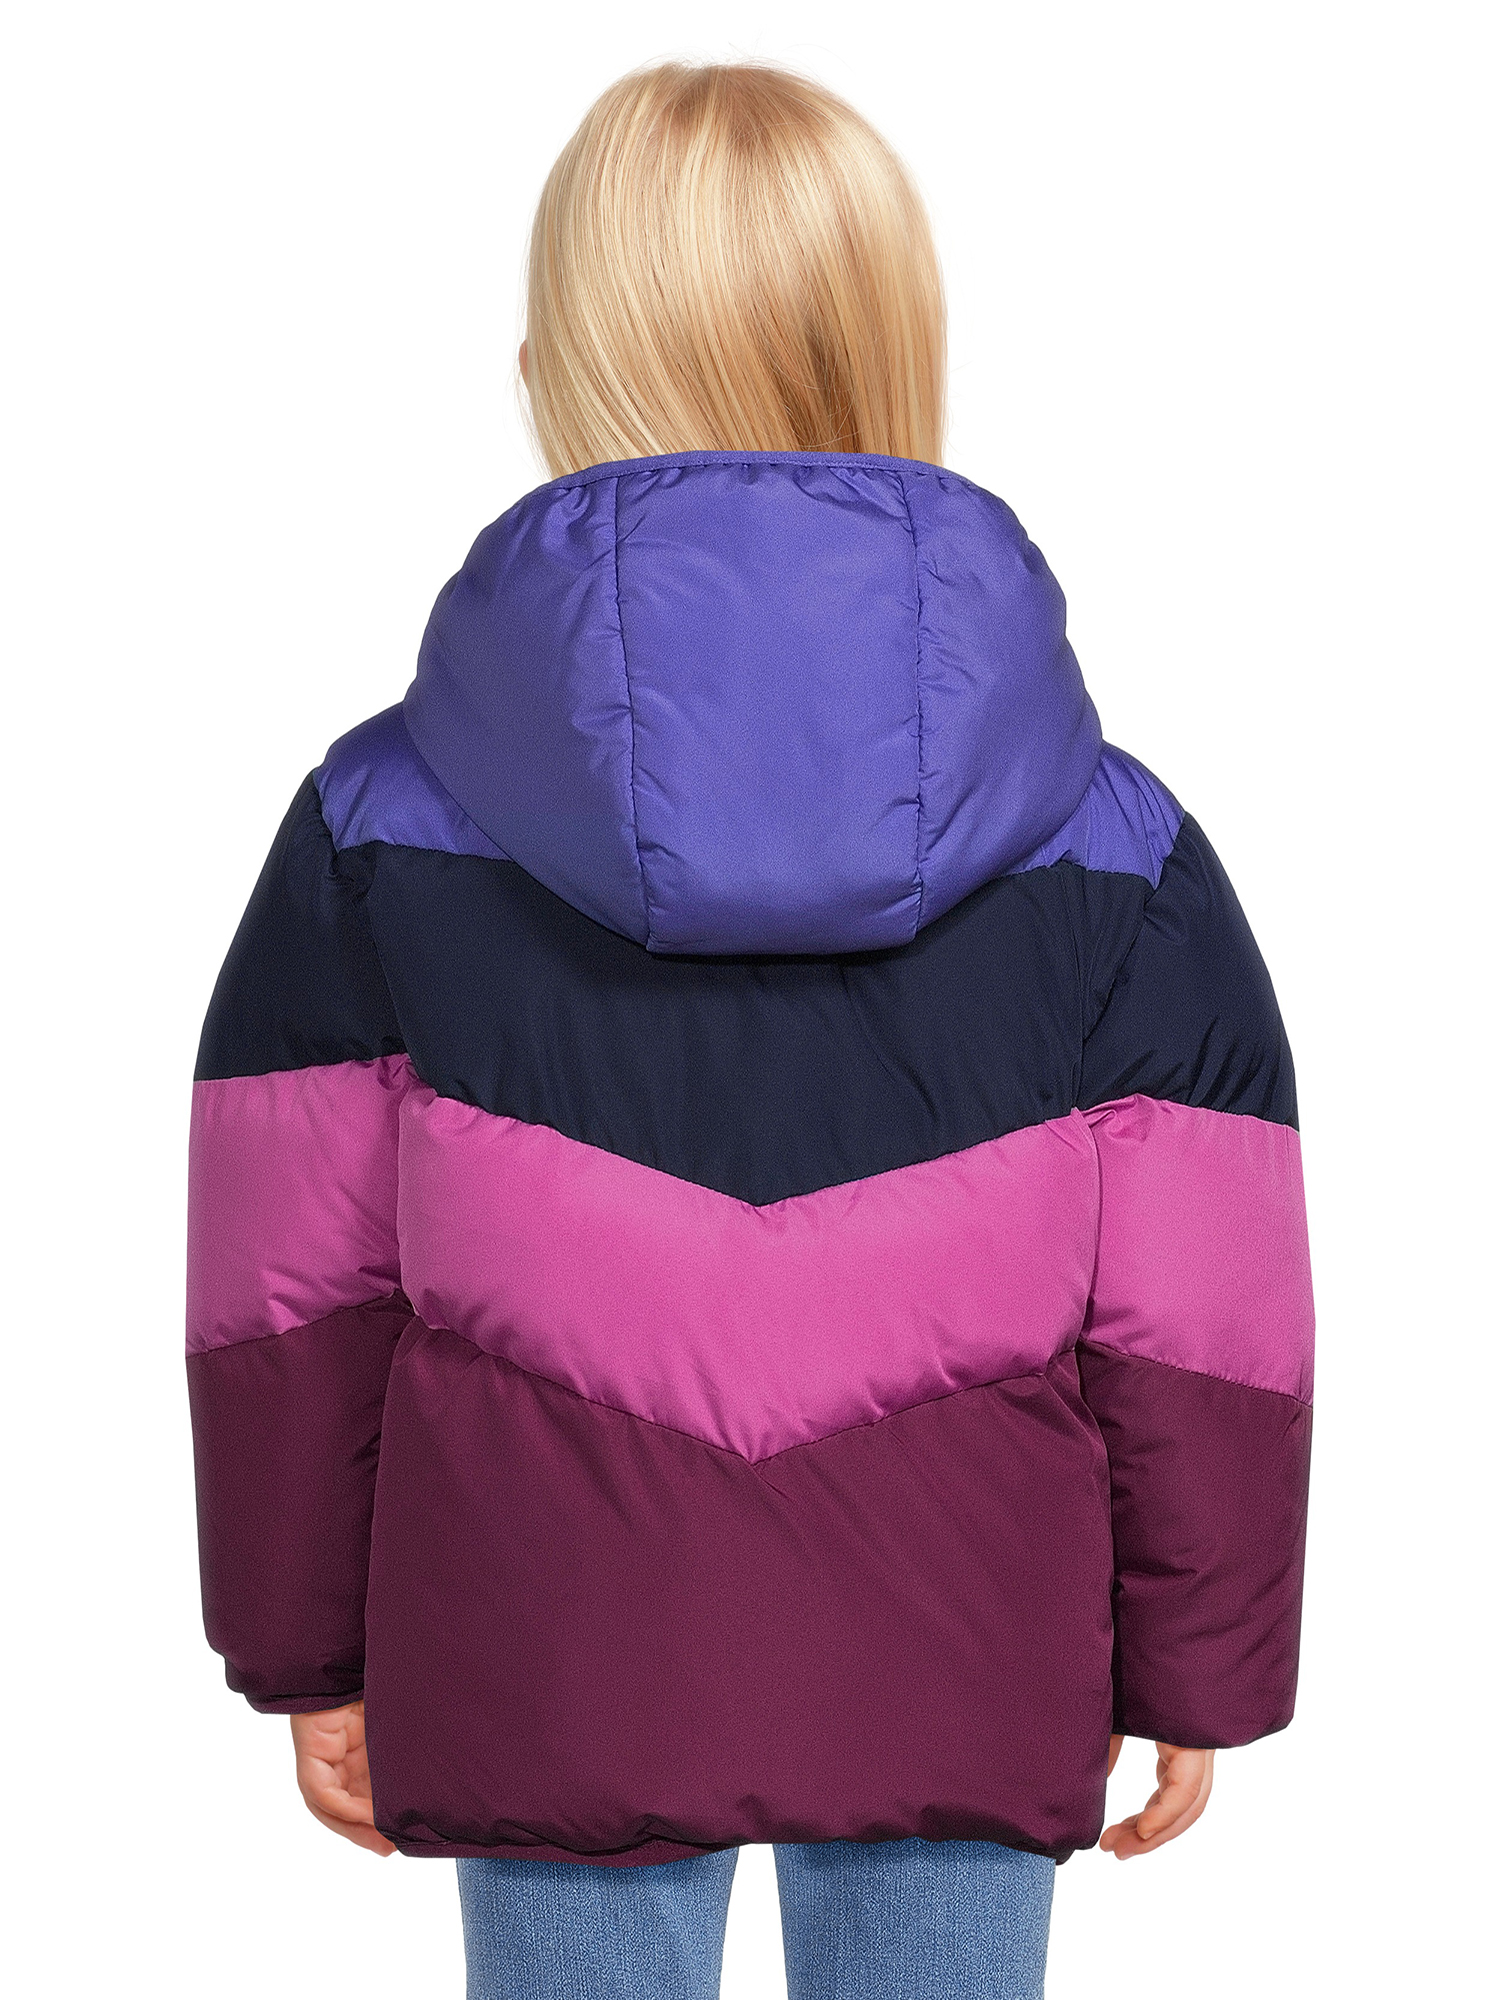 Swiss Tech Baby and Toddler Girls Puffer Jacket with Hood, Sizes 12M-5T - image 3 of 6